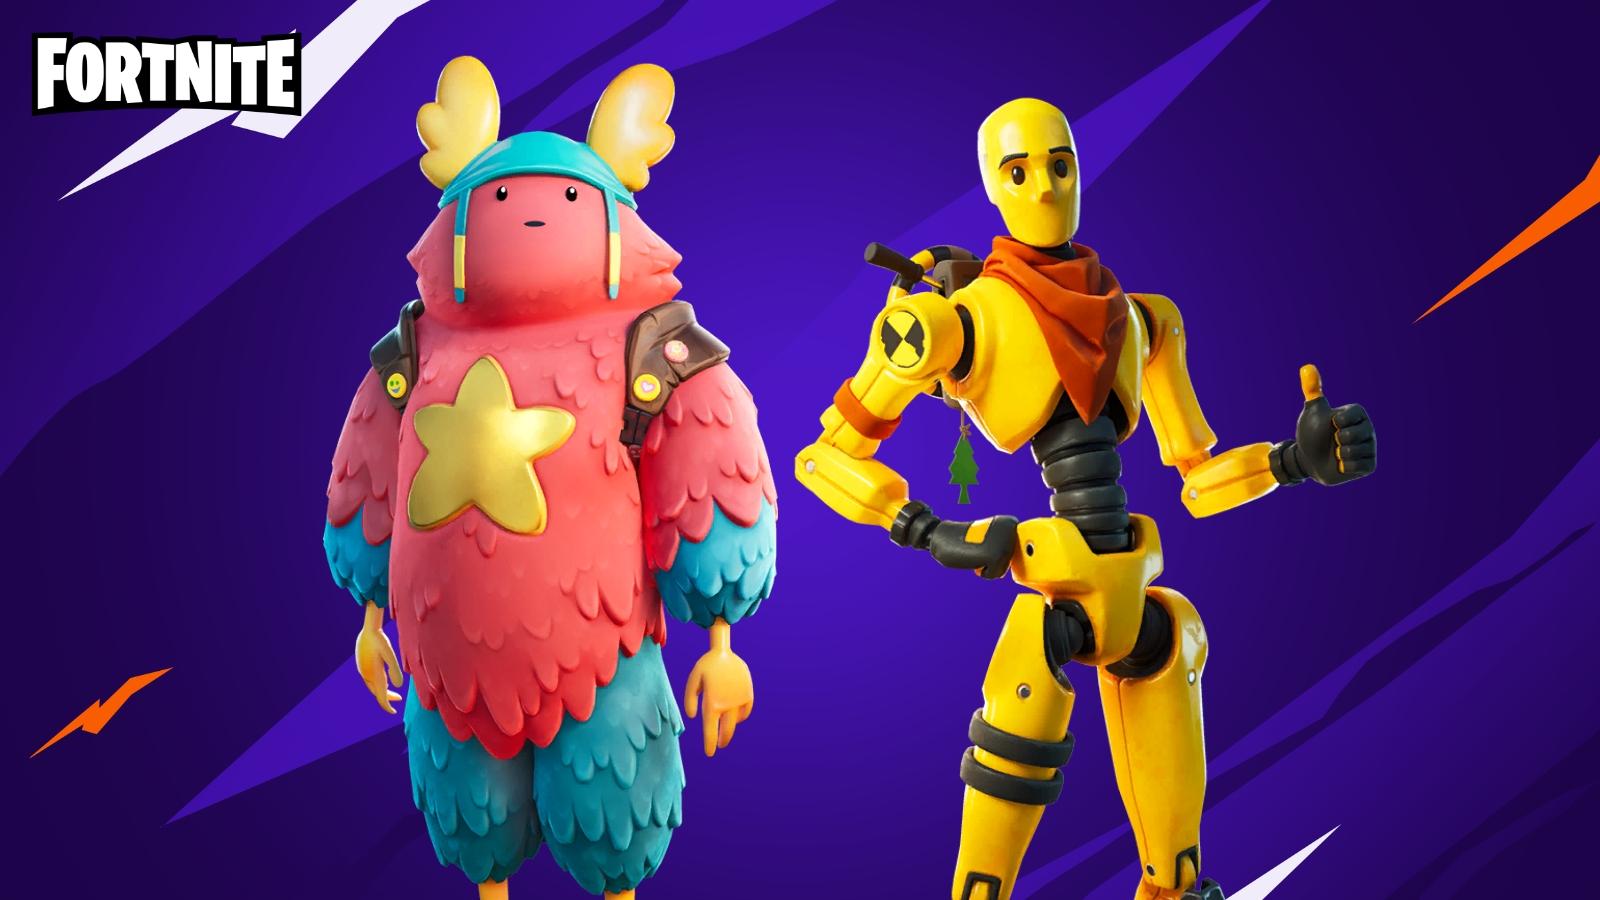 How Many Skins Are There in Fortnite?